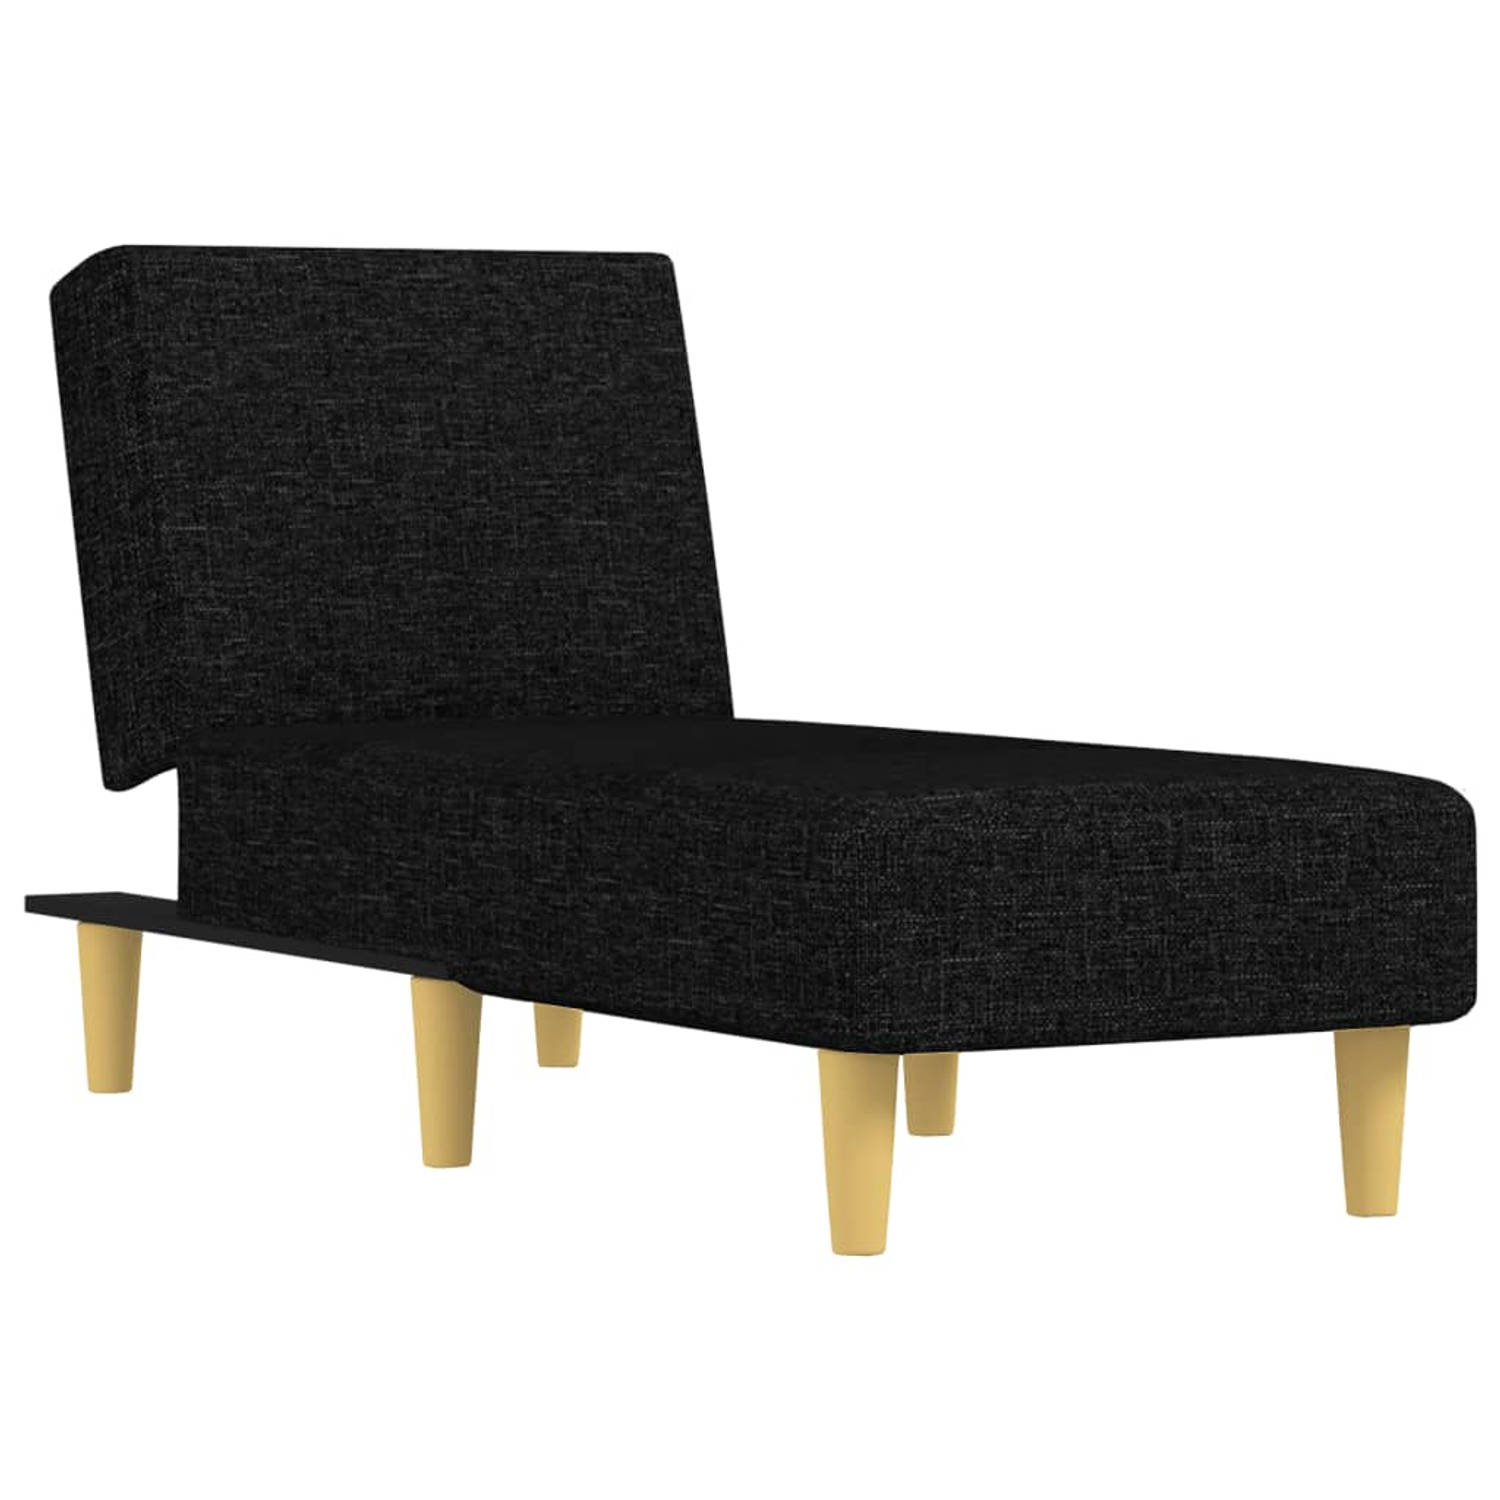 The Living Store Chaise longue stof zwart - Chaise longue